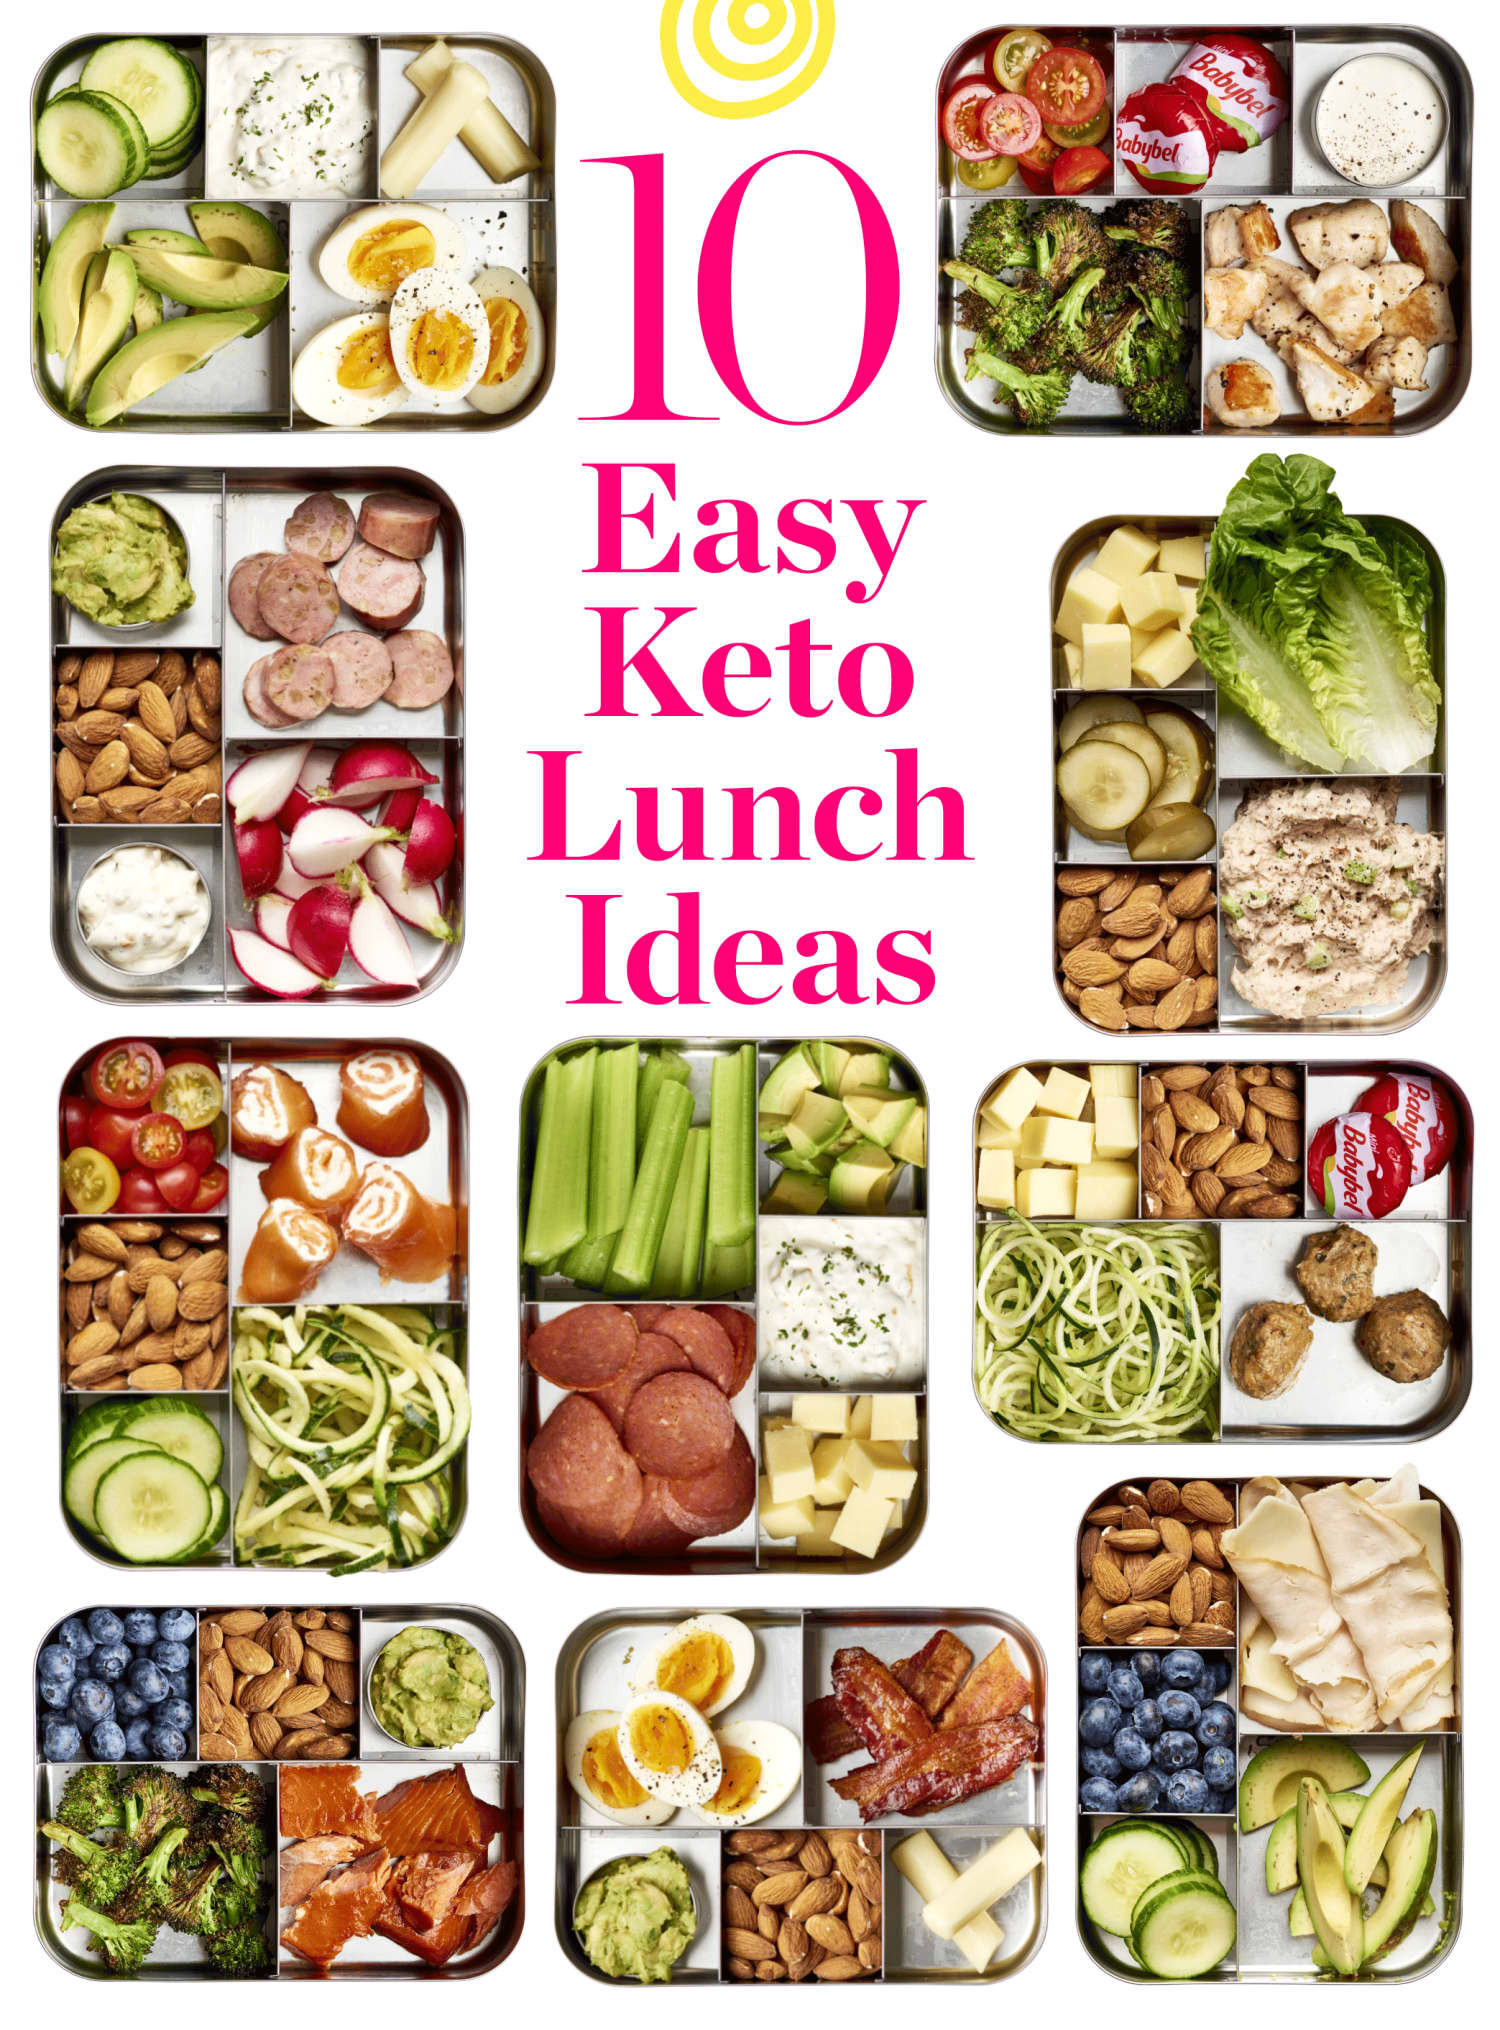 Clean Keto Lunches For Work
 10 Easy Keto Lunch Ideas with Net Carb Counts